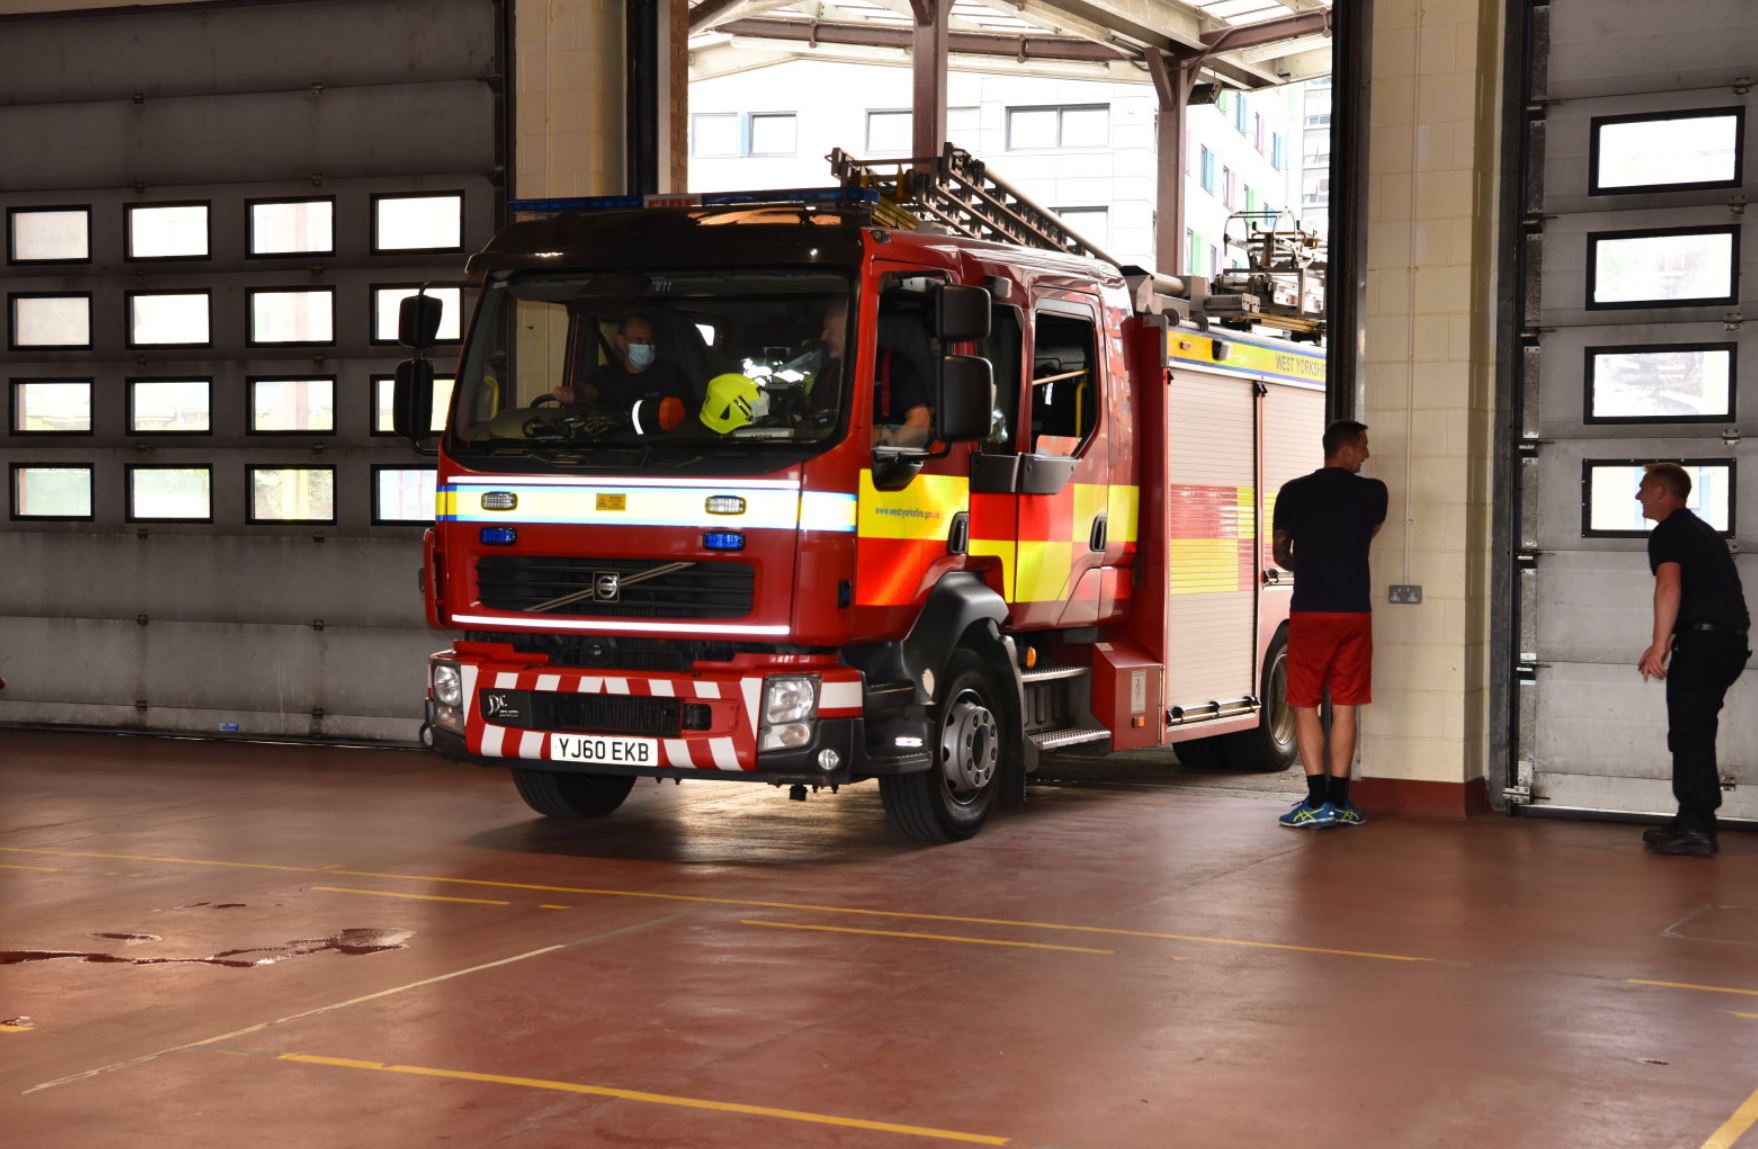 Fire engine parked in fire station with firefighters opening door. 